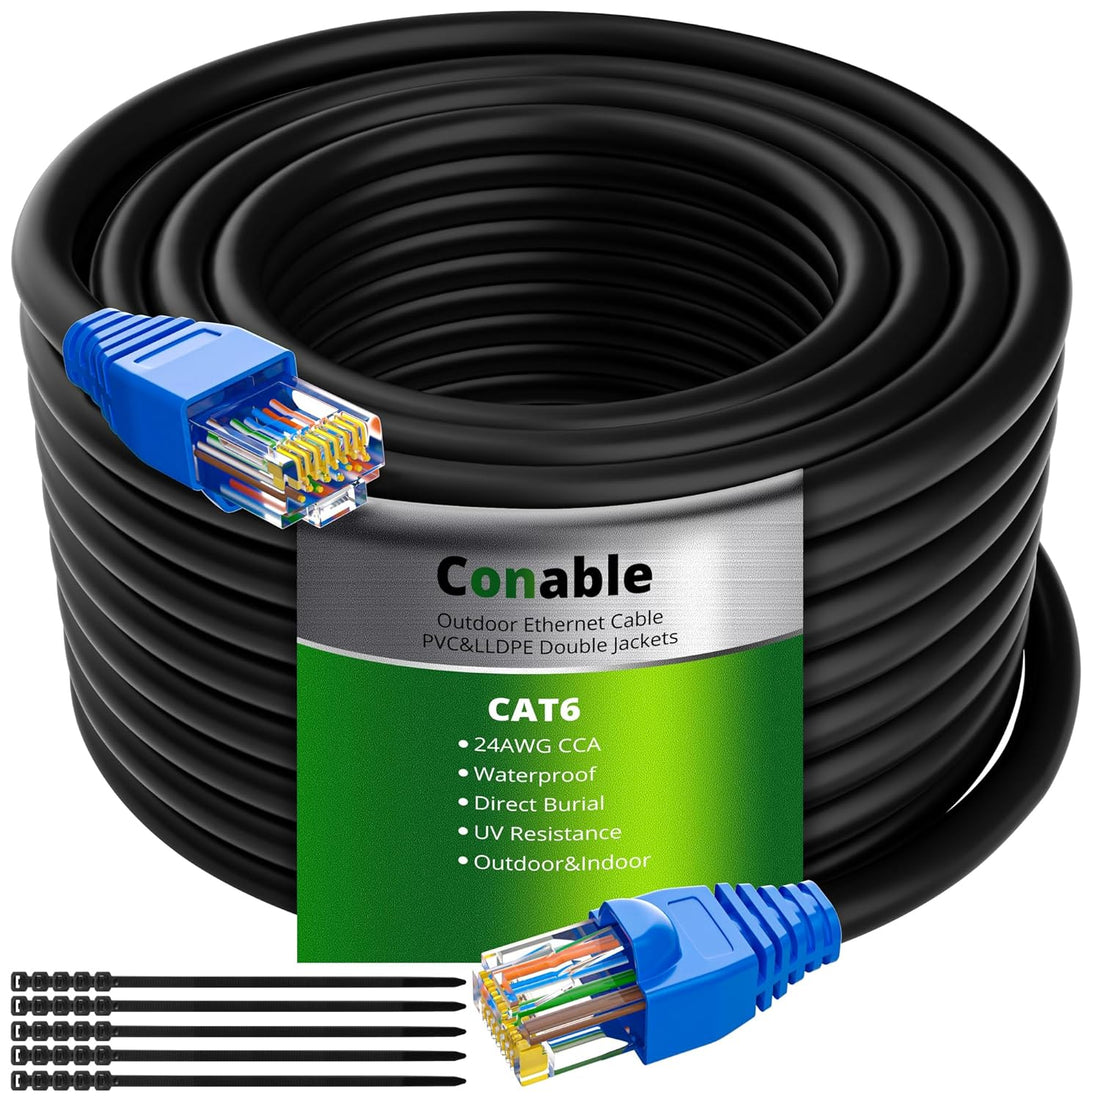 Cat6 Outdoor Ethernet Cable 25ft, Heavy Duty Double Jackets Internet Cord, Waterproof, Direct Burial, (from 25FT to 300 FT) Support PoE Cat6 Cat5e Cat5 Network, Cat 6 RJ45 Patch Cable with 25 Ties